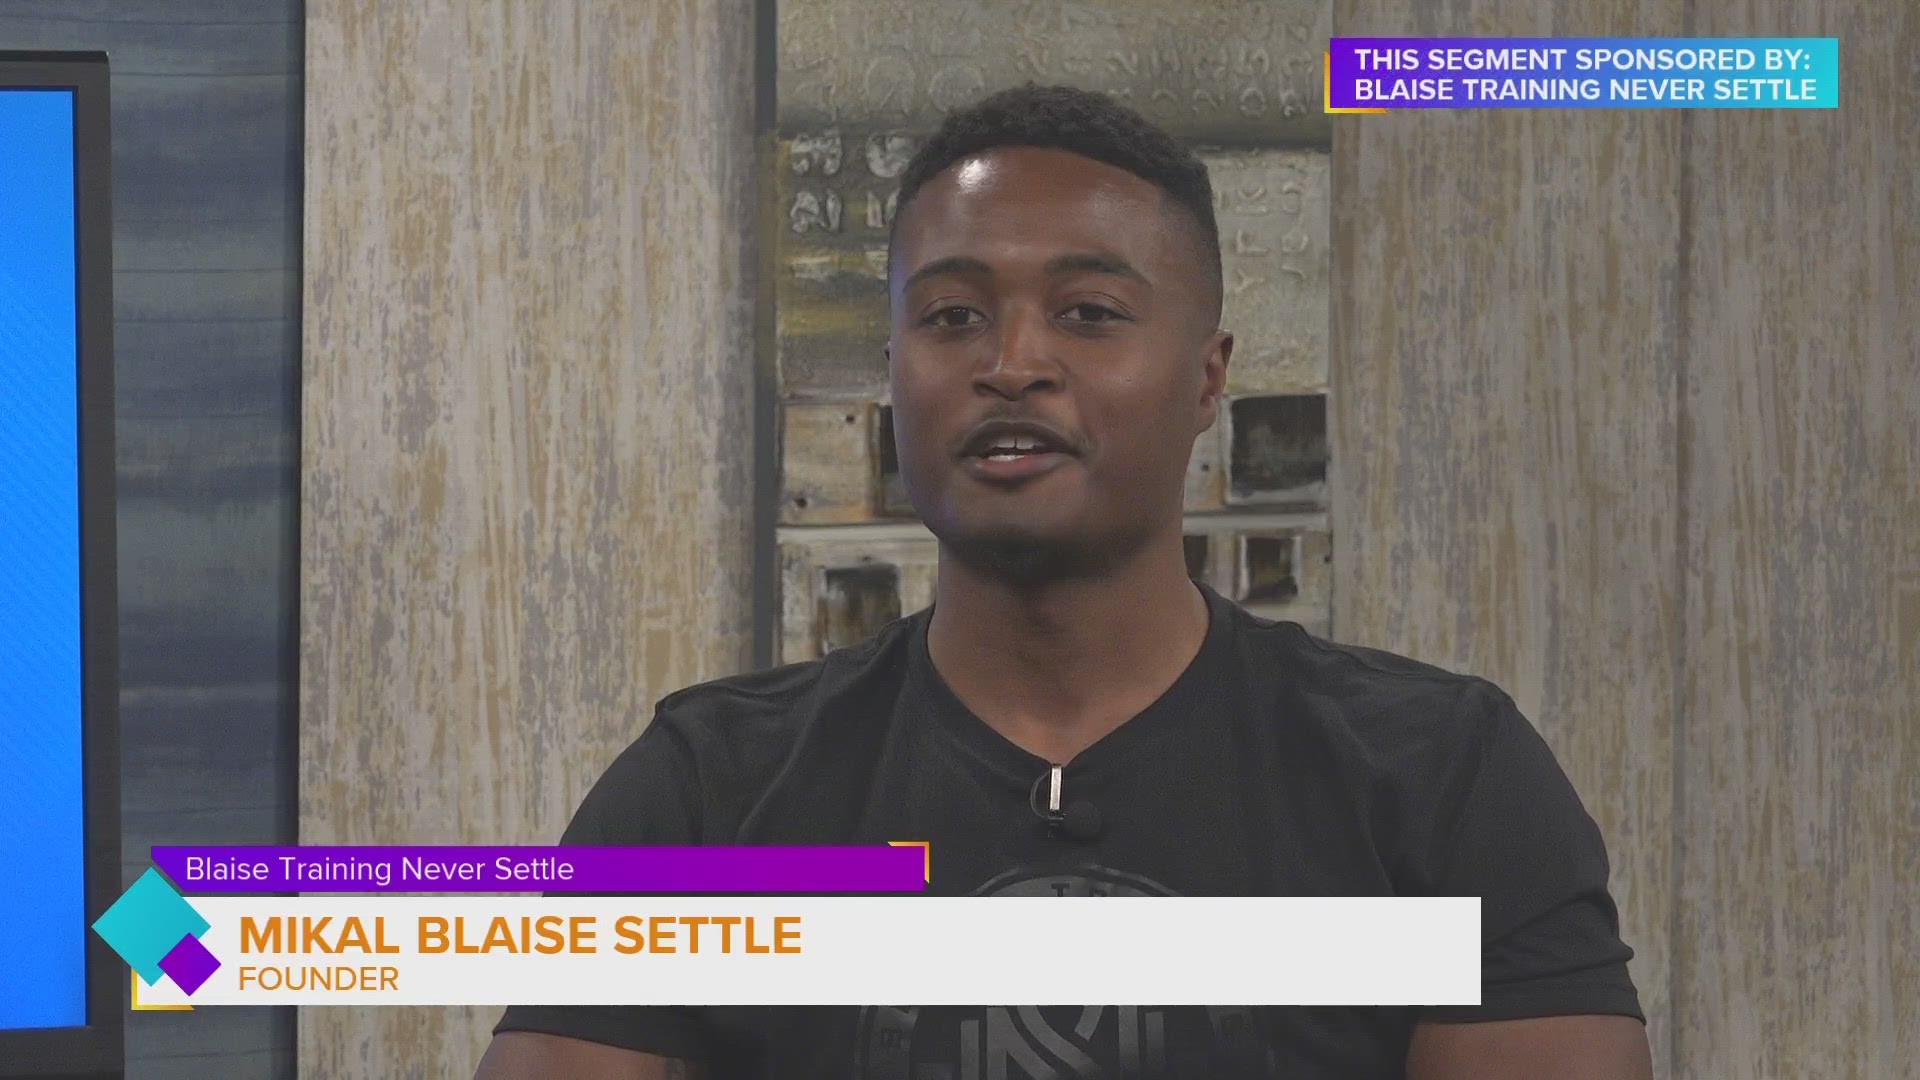 Meet the founder of "Blaise Training Never Settle" and learn the story behind this inspirational local company and the meaning behind the name | Paid Content